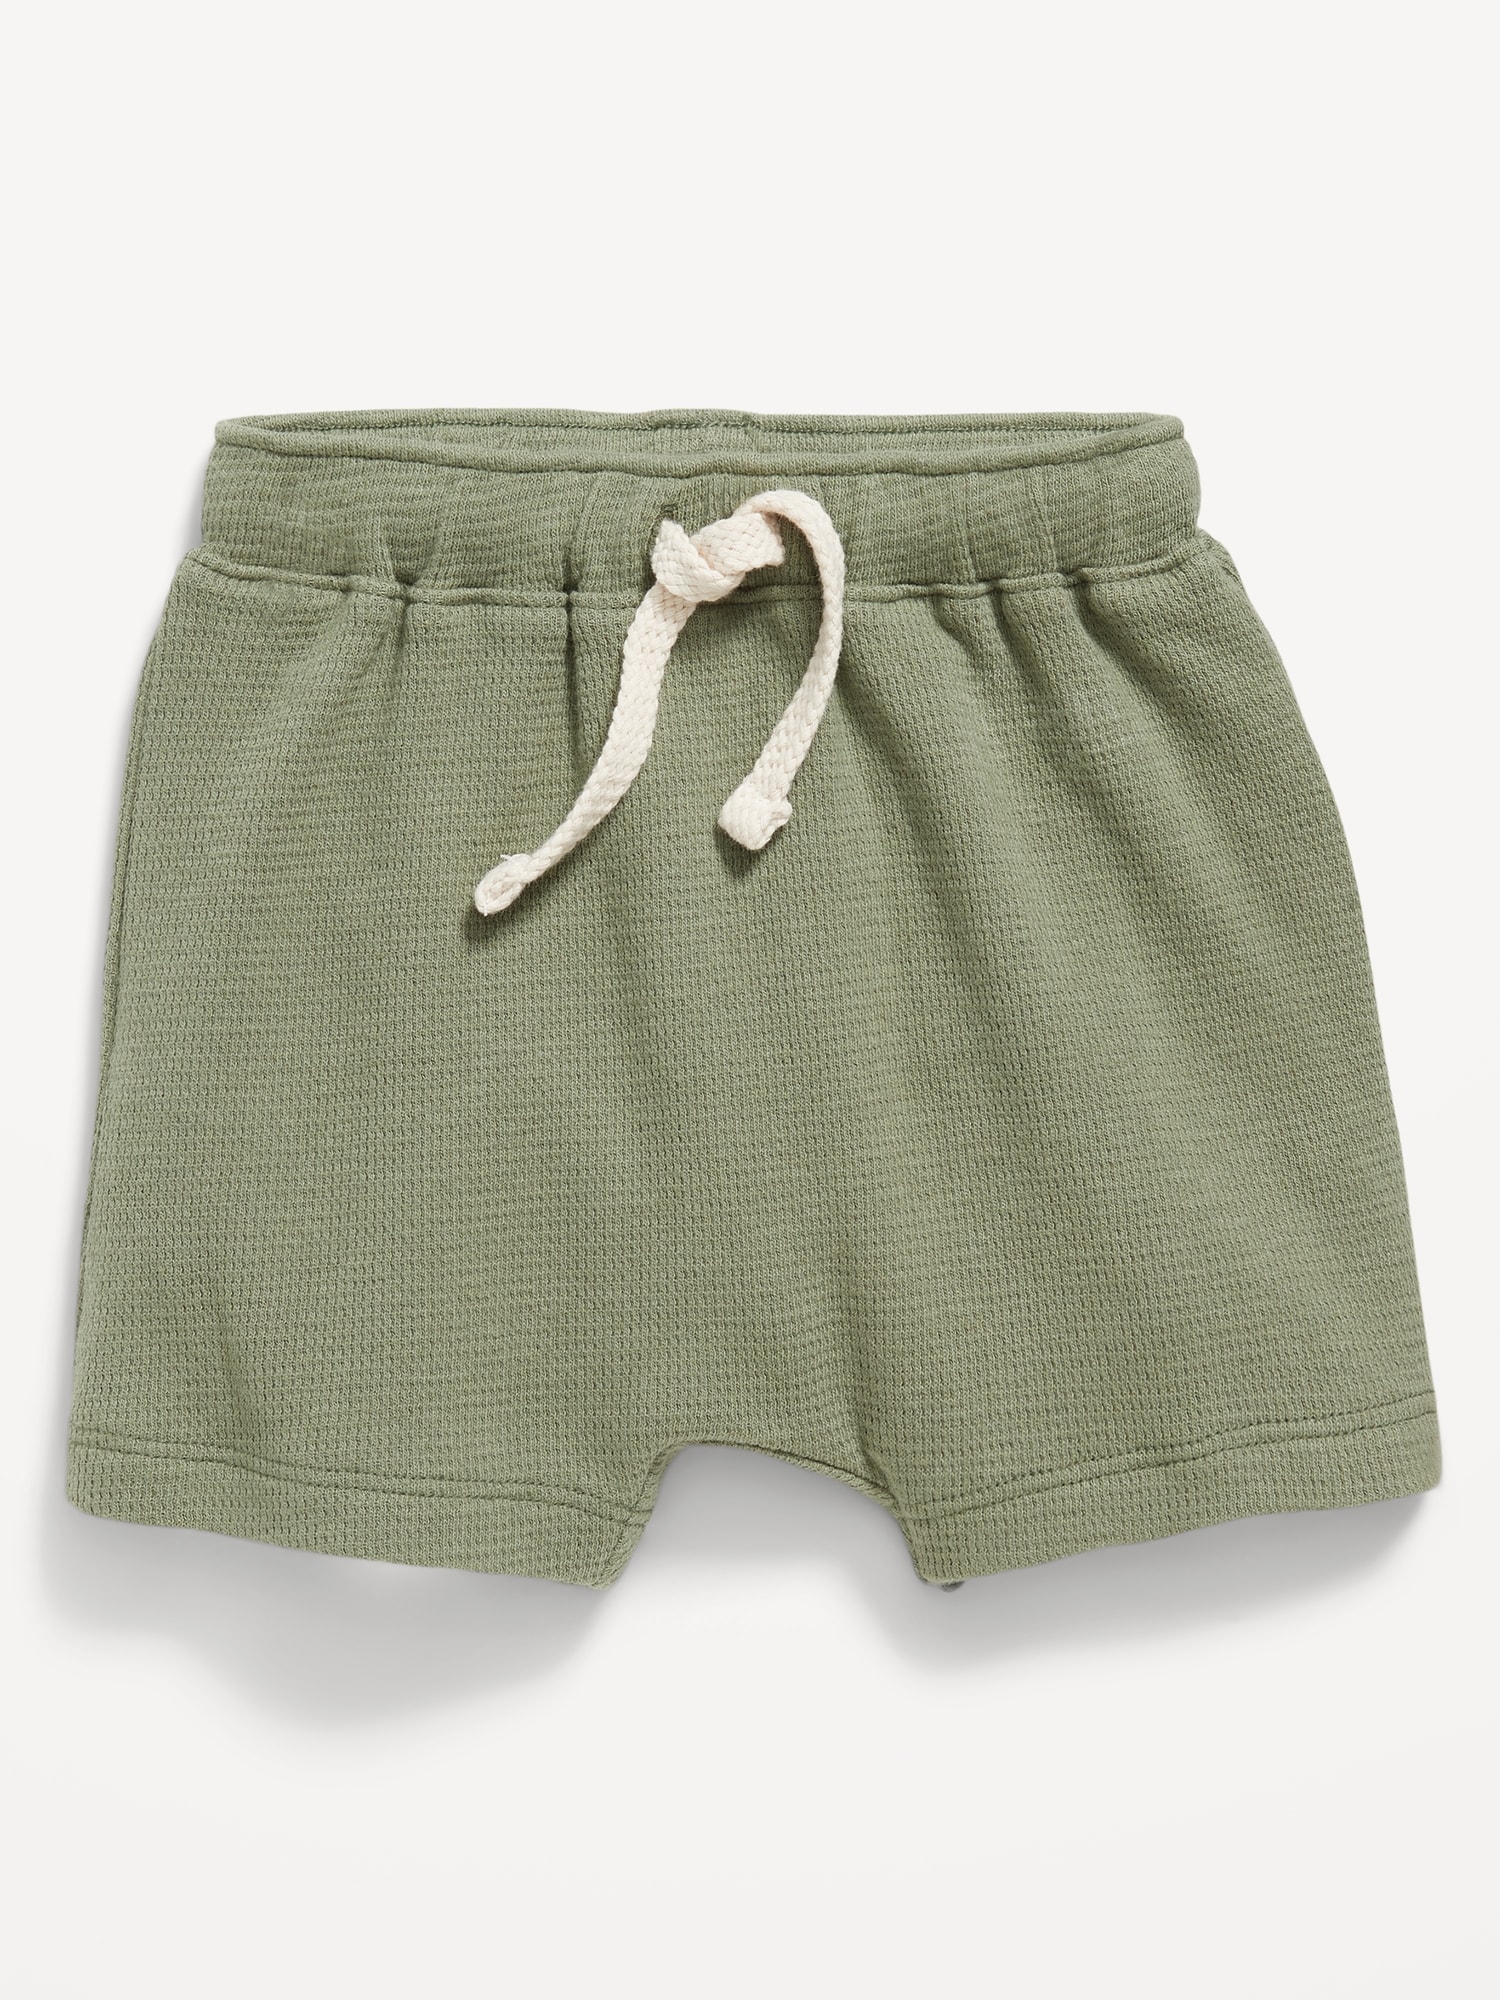 Unisex Thermal-Knit Pull-On Shorts for Baby